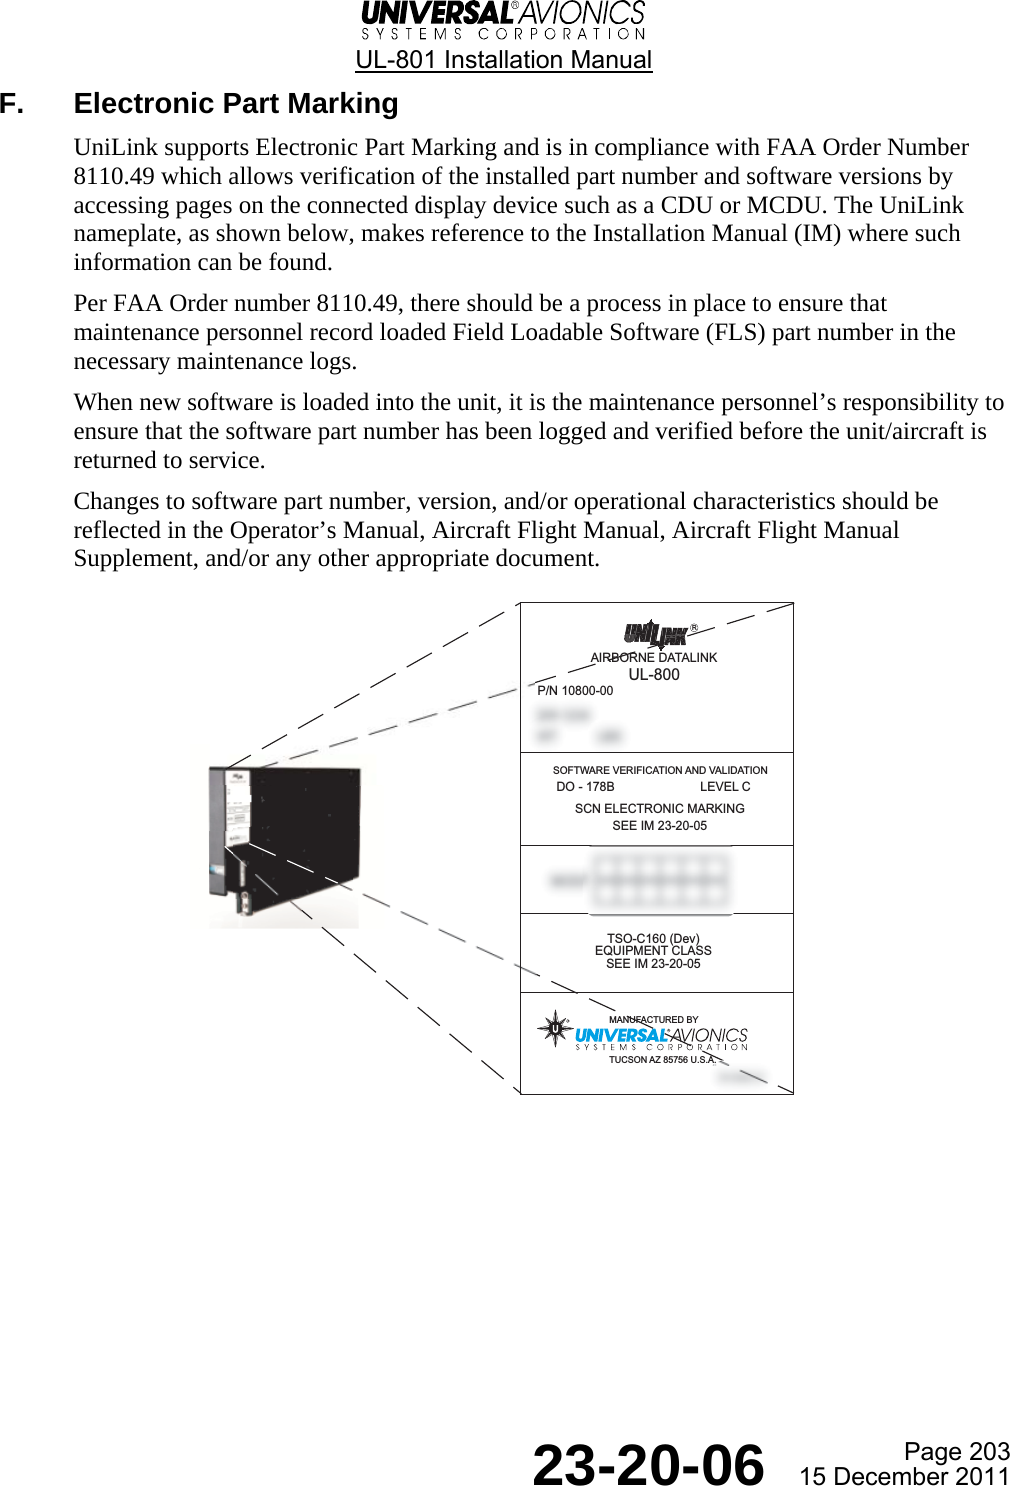  UL-801 Installation Manual  Page 203  23-20-06  15 December 2011 F.  Electronic Part Marking UniLink supports Electronic Part Marking and is in compliance with FAA Order Number 8110.49 which allows verification of the installed part number and software versions by accessing pages on the connected display device such as a CDU or MCDU. The UniLink nameplate, as shown below, makes reference to the Installation Manual (IM) where such information can be found. Per FAA Order number 8110.49, there should be a process in place to ensure that maintenance personnel record loaded Field Loadable Software (FLS) part number in the necessary maintenance logs. When new software is loaded into the unit, it is the maintenance personnel’s responsibility to ensure that the software part number has been logged and verified before the unit/aircraft is returned to service. Changes to software part number, version, and/or operational characteristics should be reflected in the Operator’s Manual, Aircraft Flight Manual, Aircraft Flight Manual Supplement, and/or any other appropriate document.     AIRBORNE DATALINKUL-800SOFTWARE VERIFICATION AND VALIDATION DO - 178B                         LEVEL CTSO-C160 (Dev)EQUIPMENT CLASSSEE IM 23-20-05RSCN ELECTRONIC MARKINGSEE IM 23-20-05P/N 10800-00MANUFACTURED BYTUCSON AZ 85756 U.S.A.